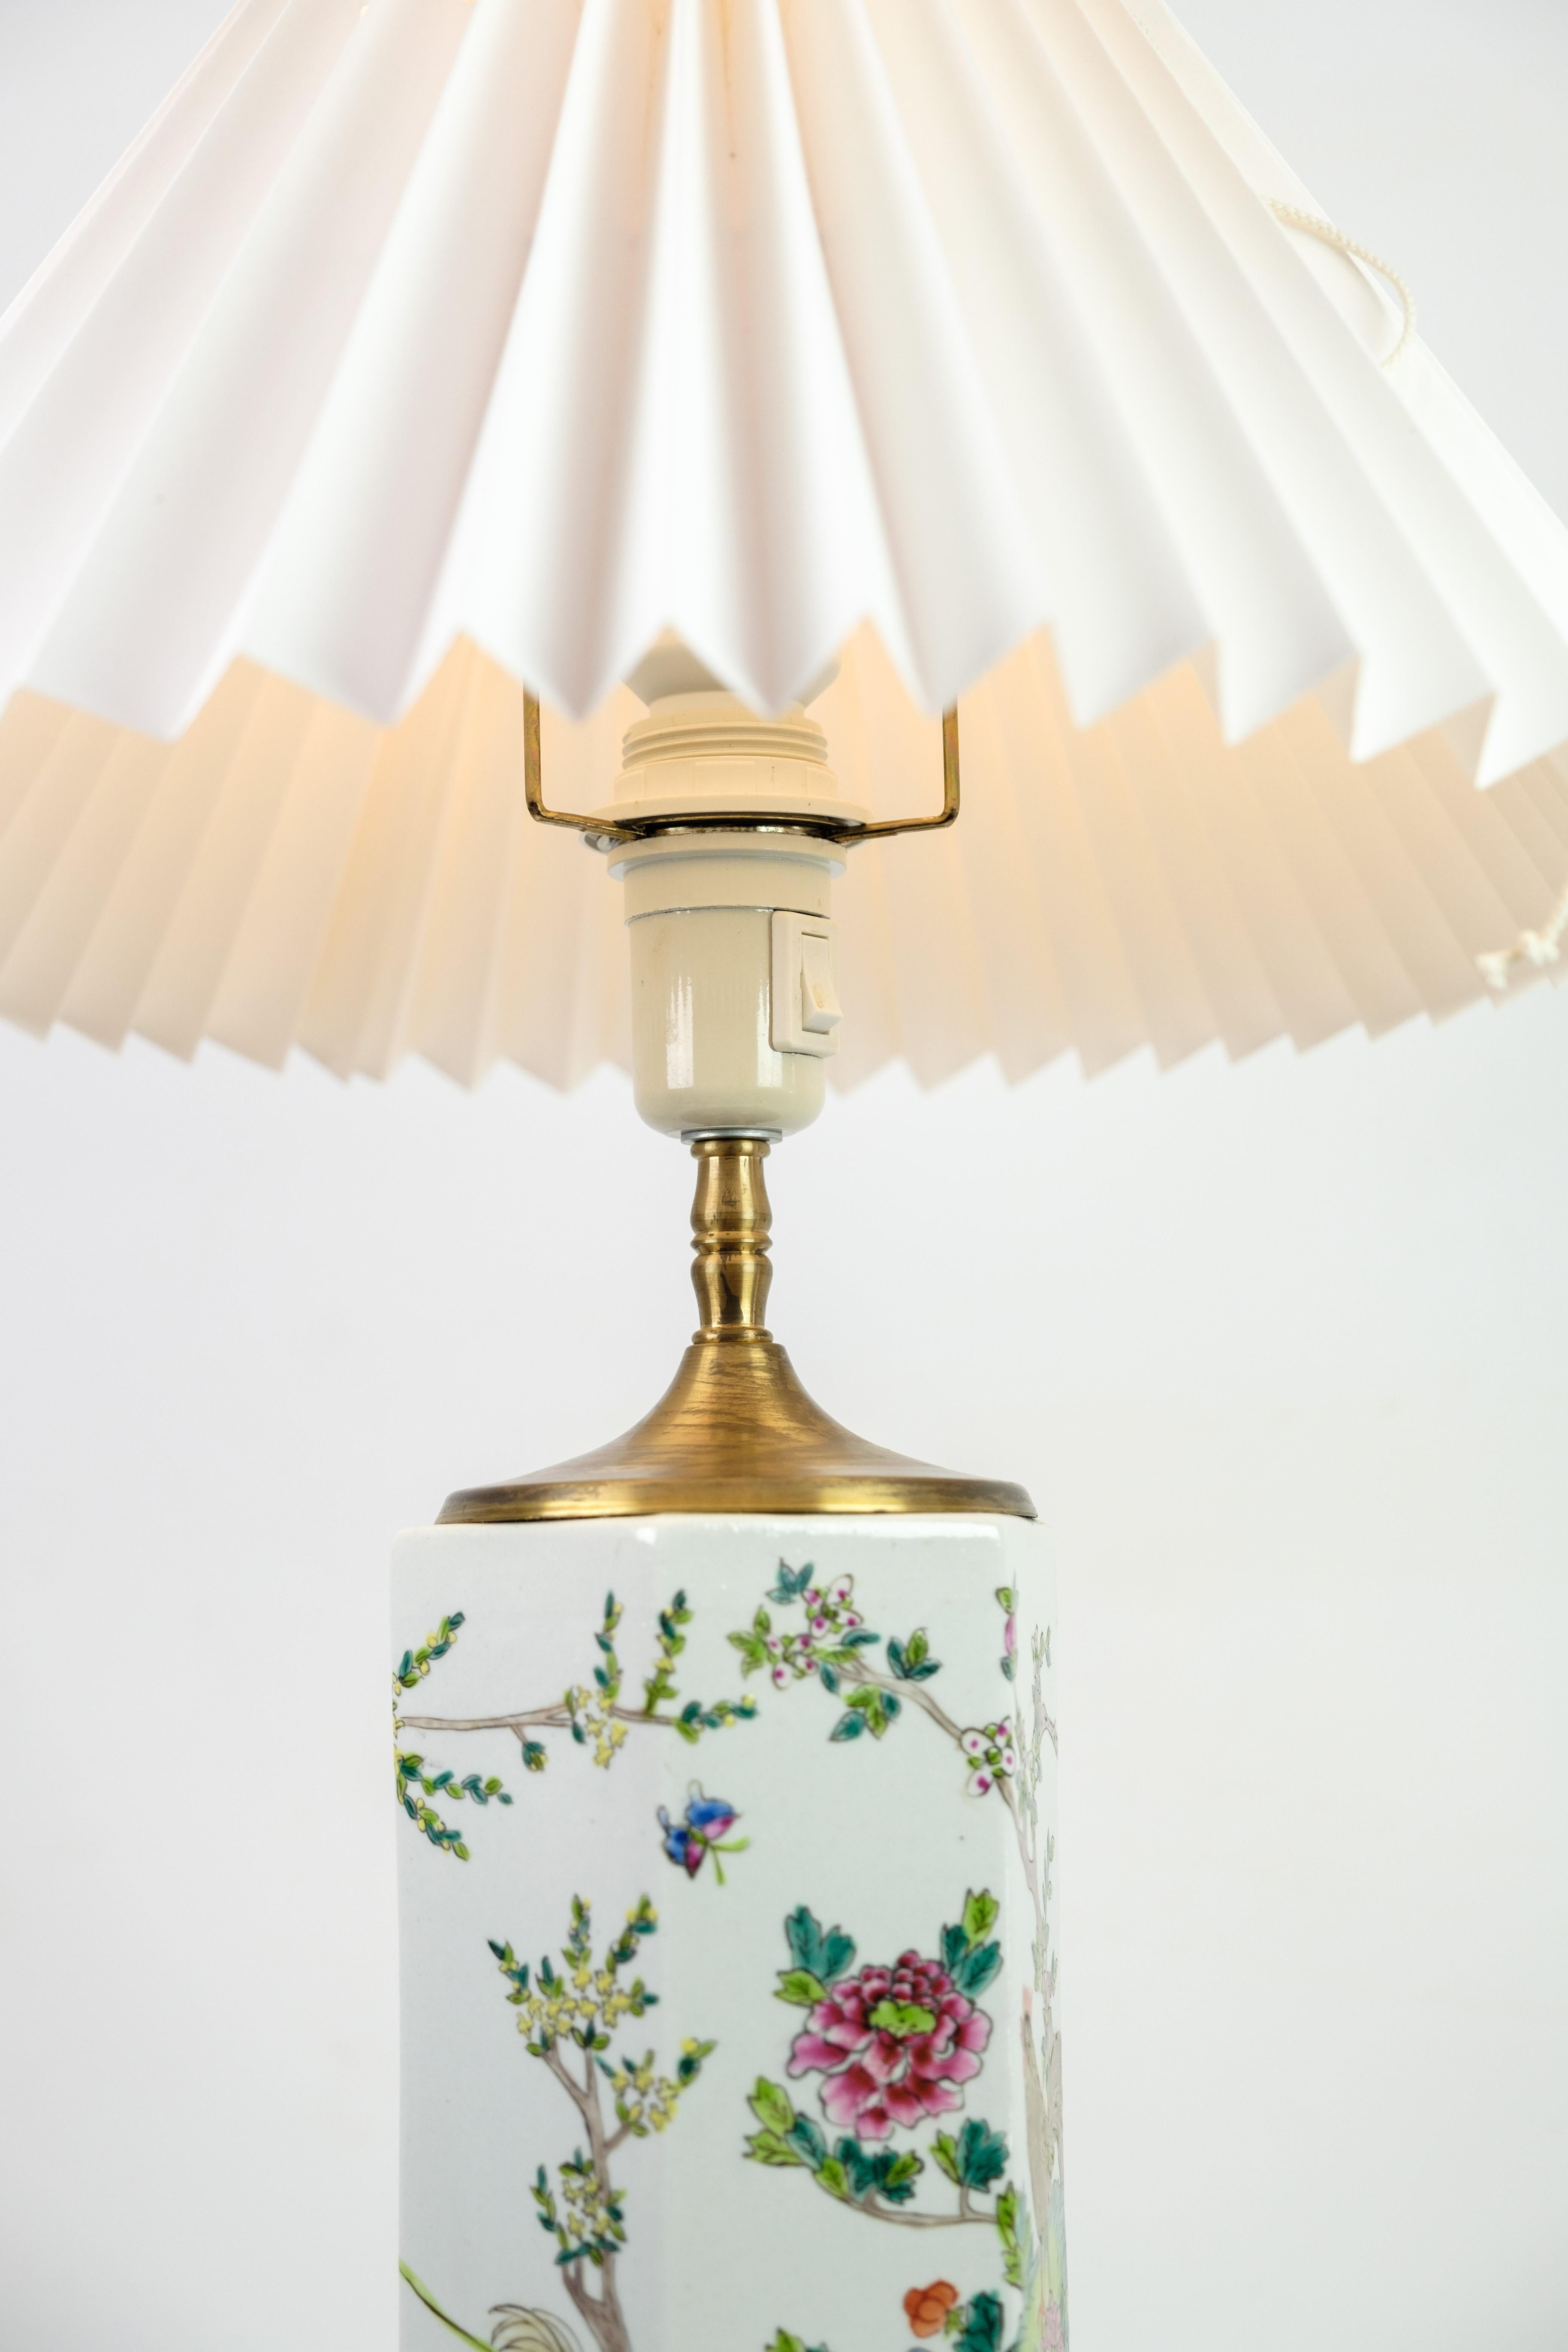 Chinese Table Lamp Made In Porcelain With White Shade From 1920s im Angebot 4